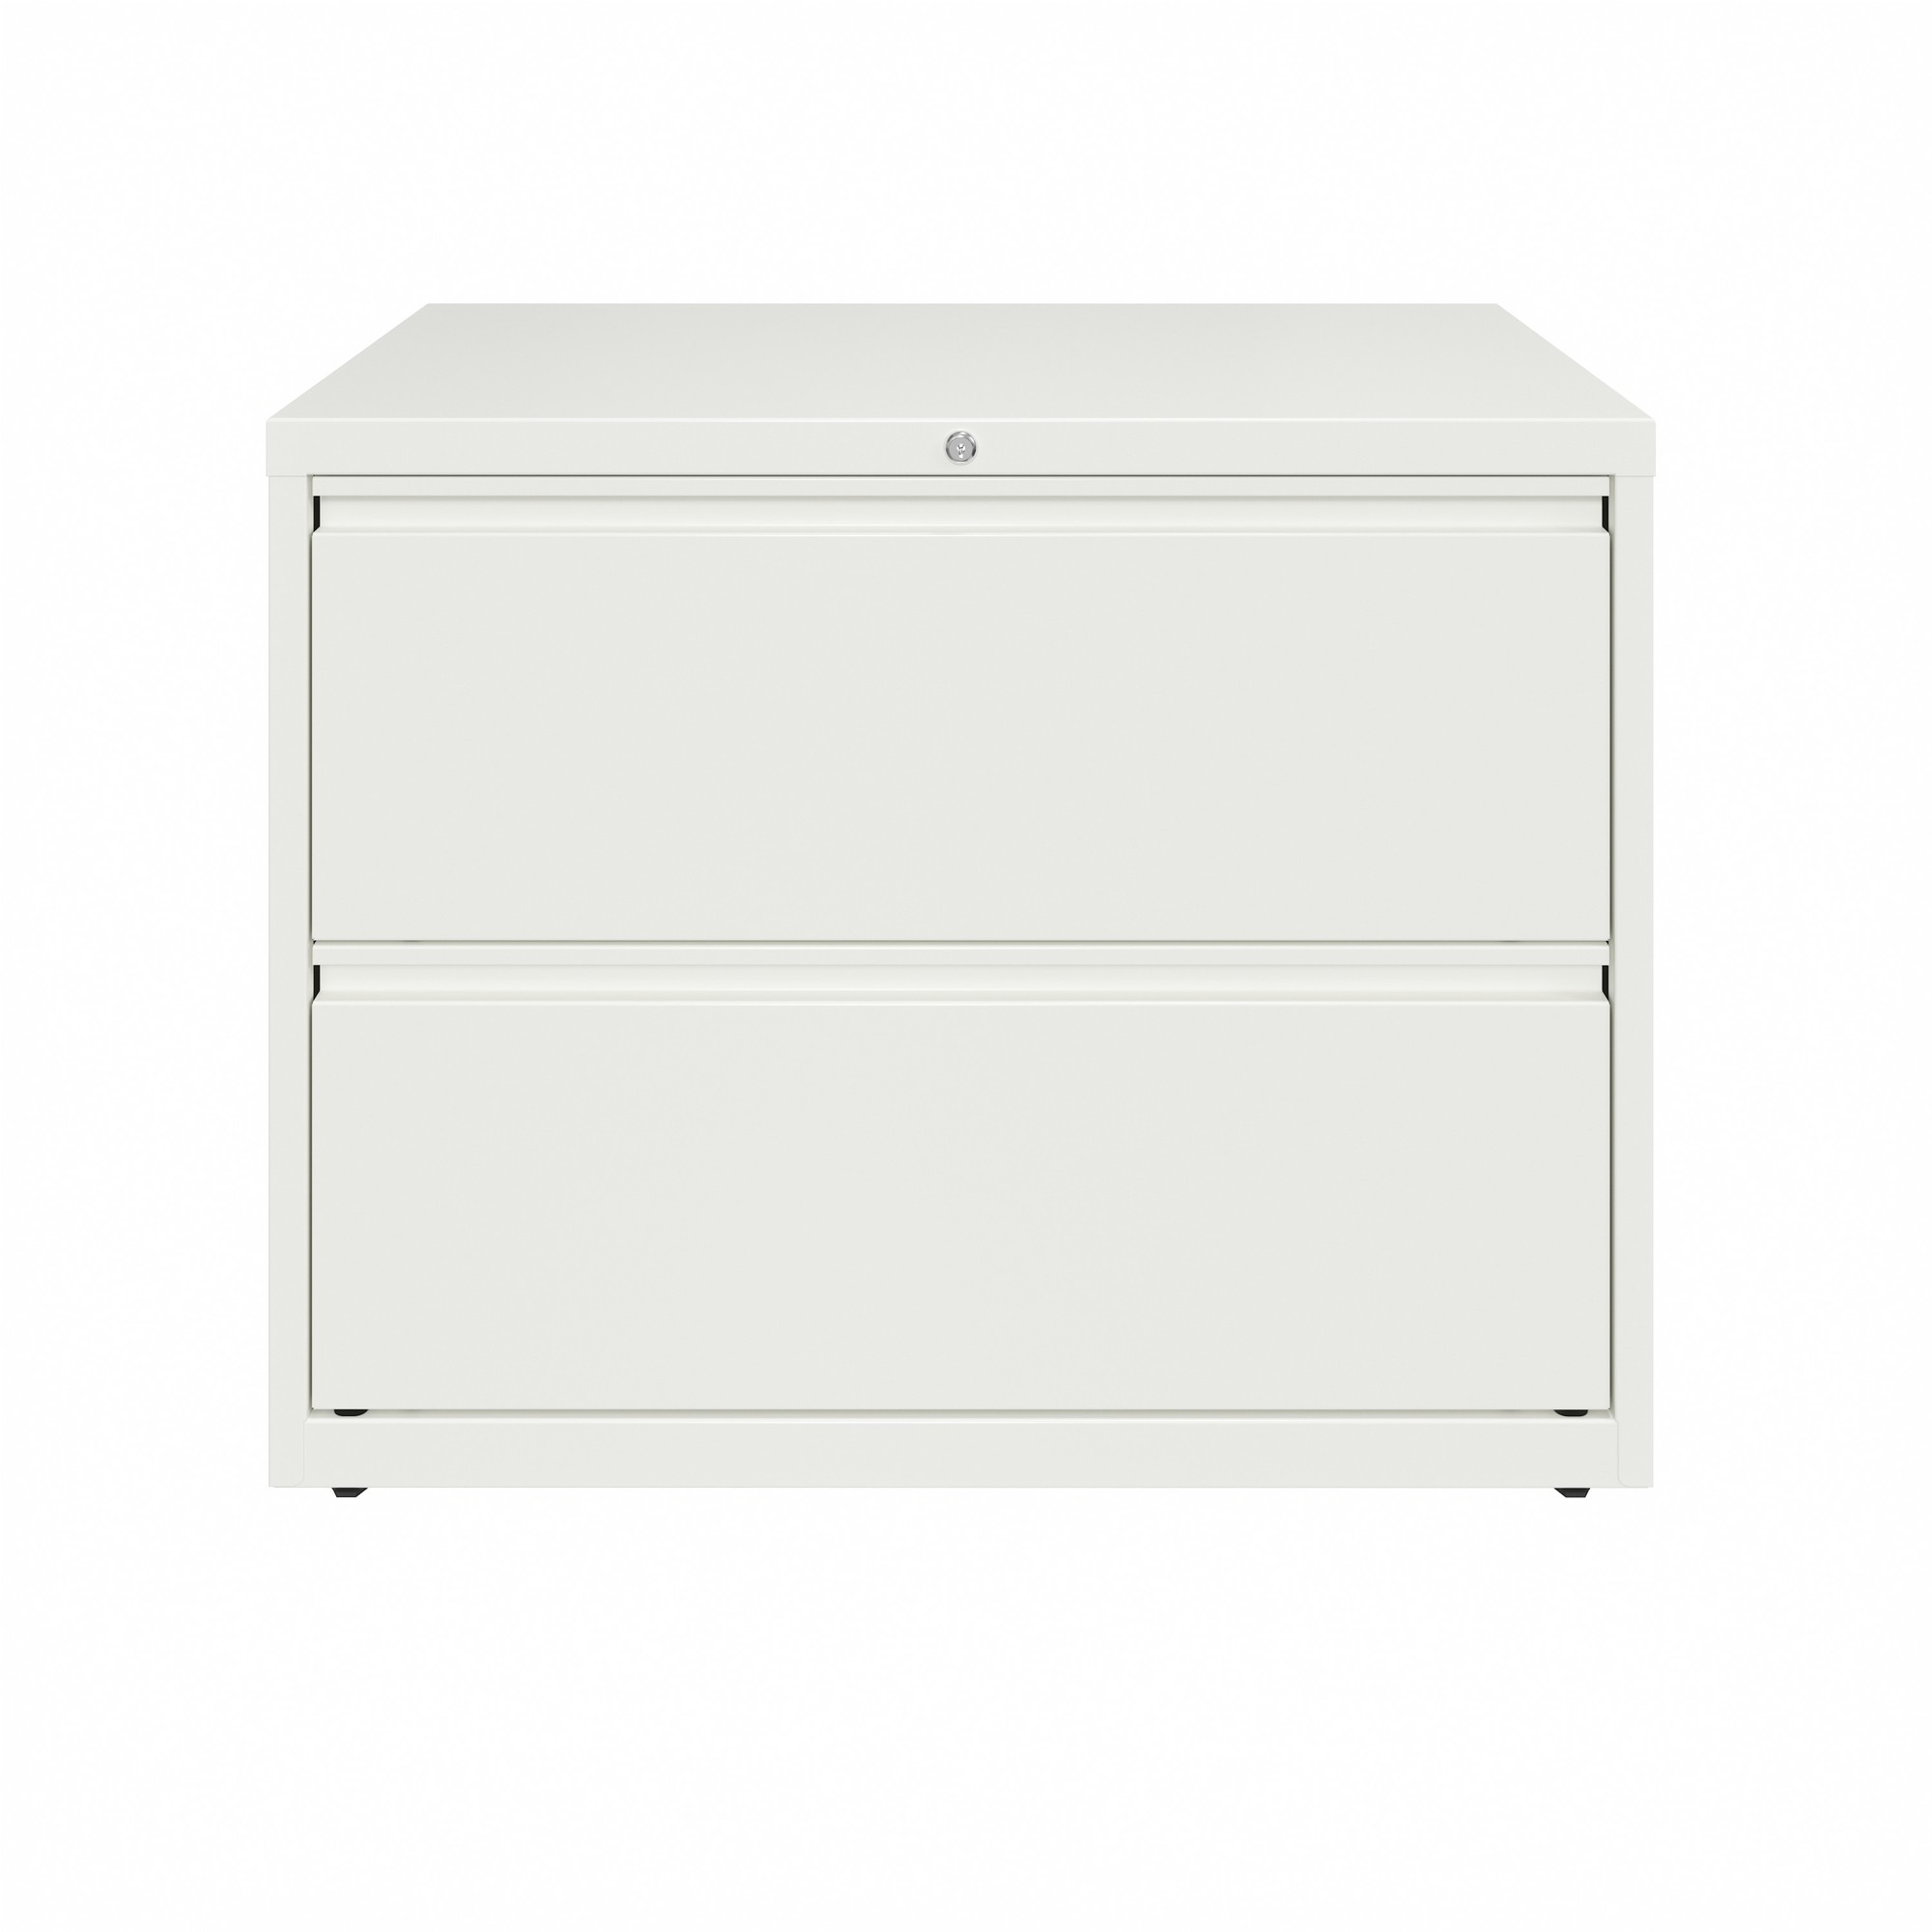 Hirsh Industries, 2 Drawer Lateral File Cabinet, Width 36 in, Depth 18.625 in, Height 28 in, Model 23700